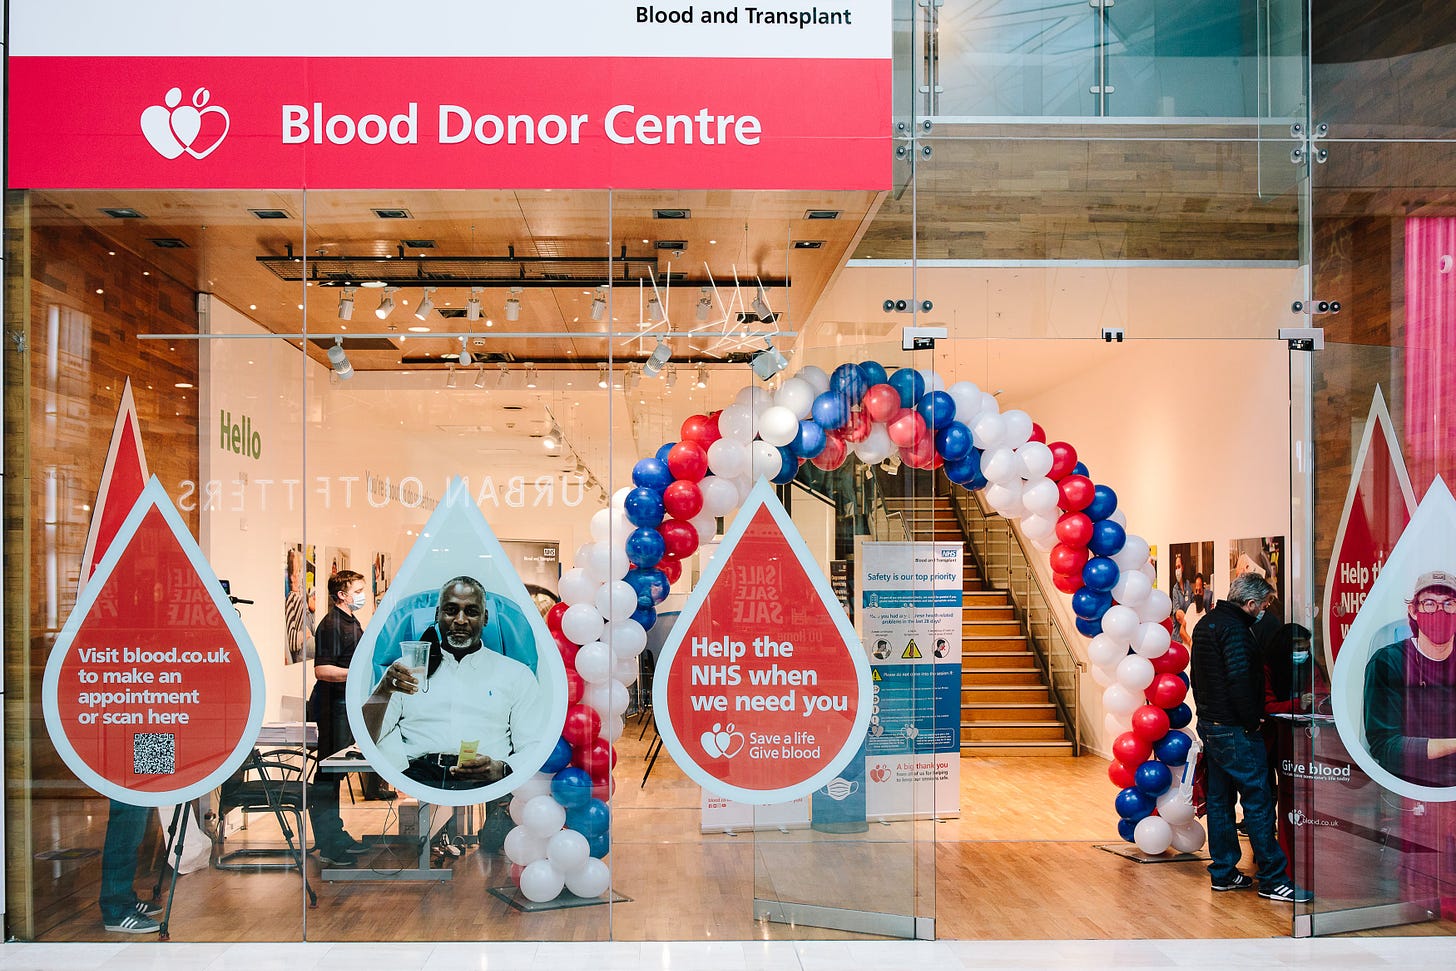 New Blood Donor Centre opens in London - NHS Blood Donation